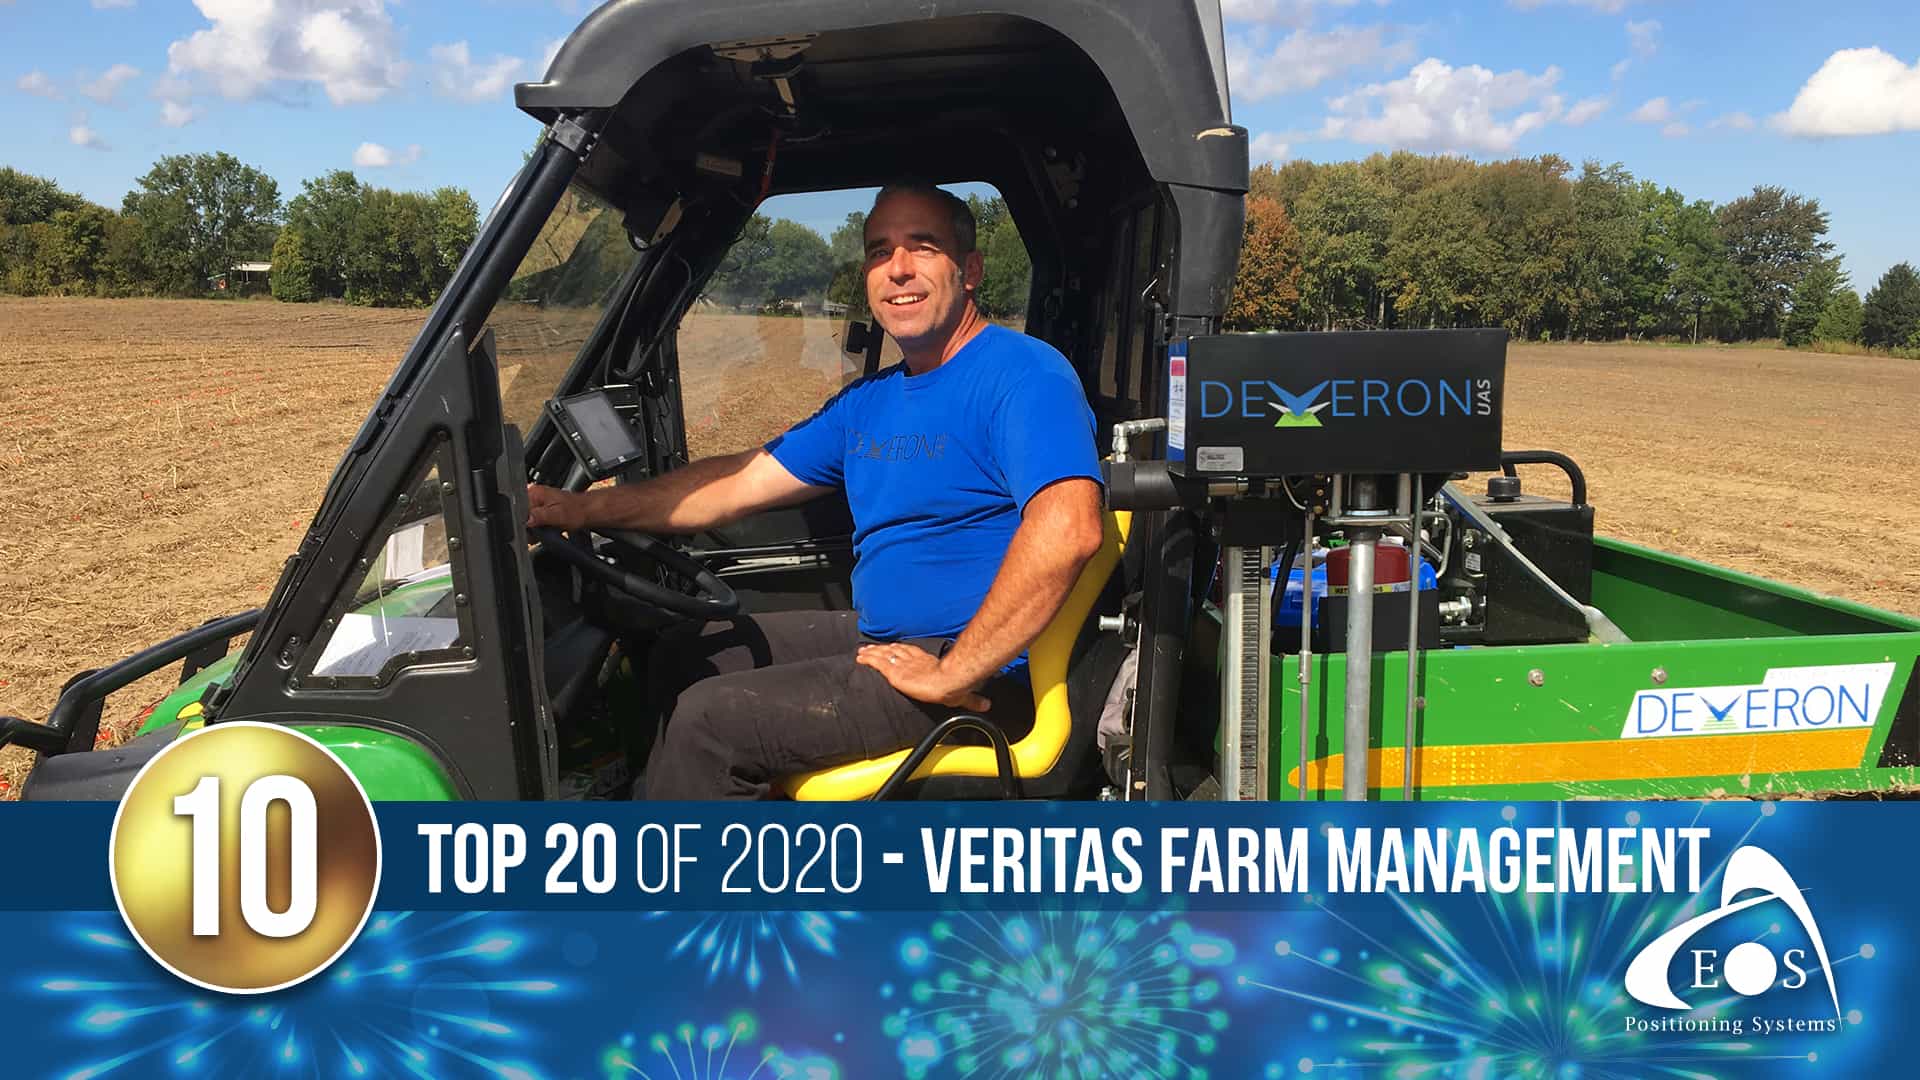 Eos Positioning Systems blog top articles of 2020: 10 - Veritas Farm Management